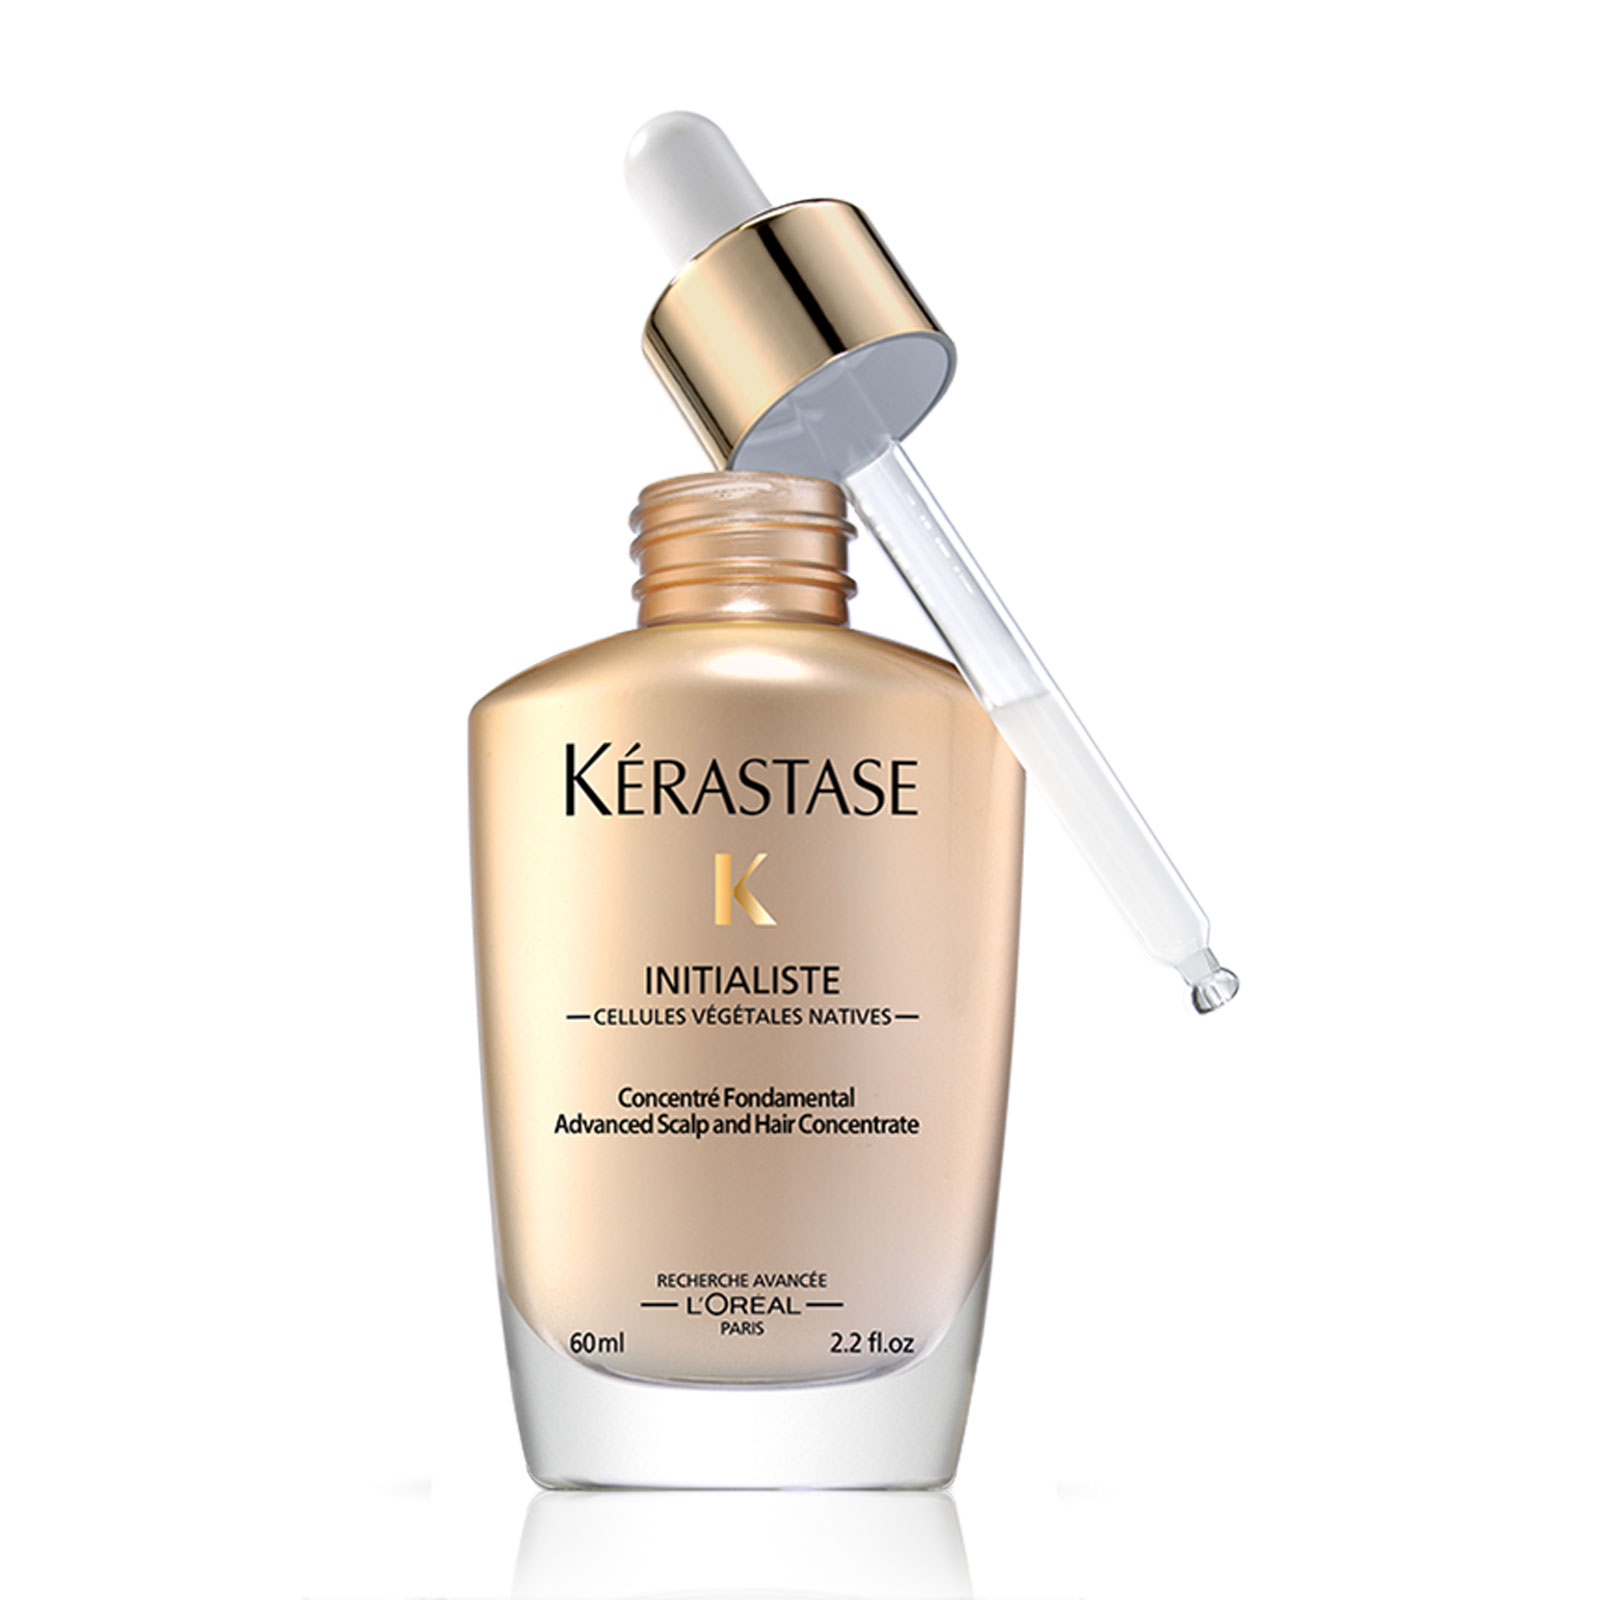 K�rastase INITIALISTE Advanced Scalp and Hair Concentrate 60ml